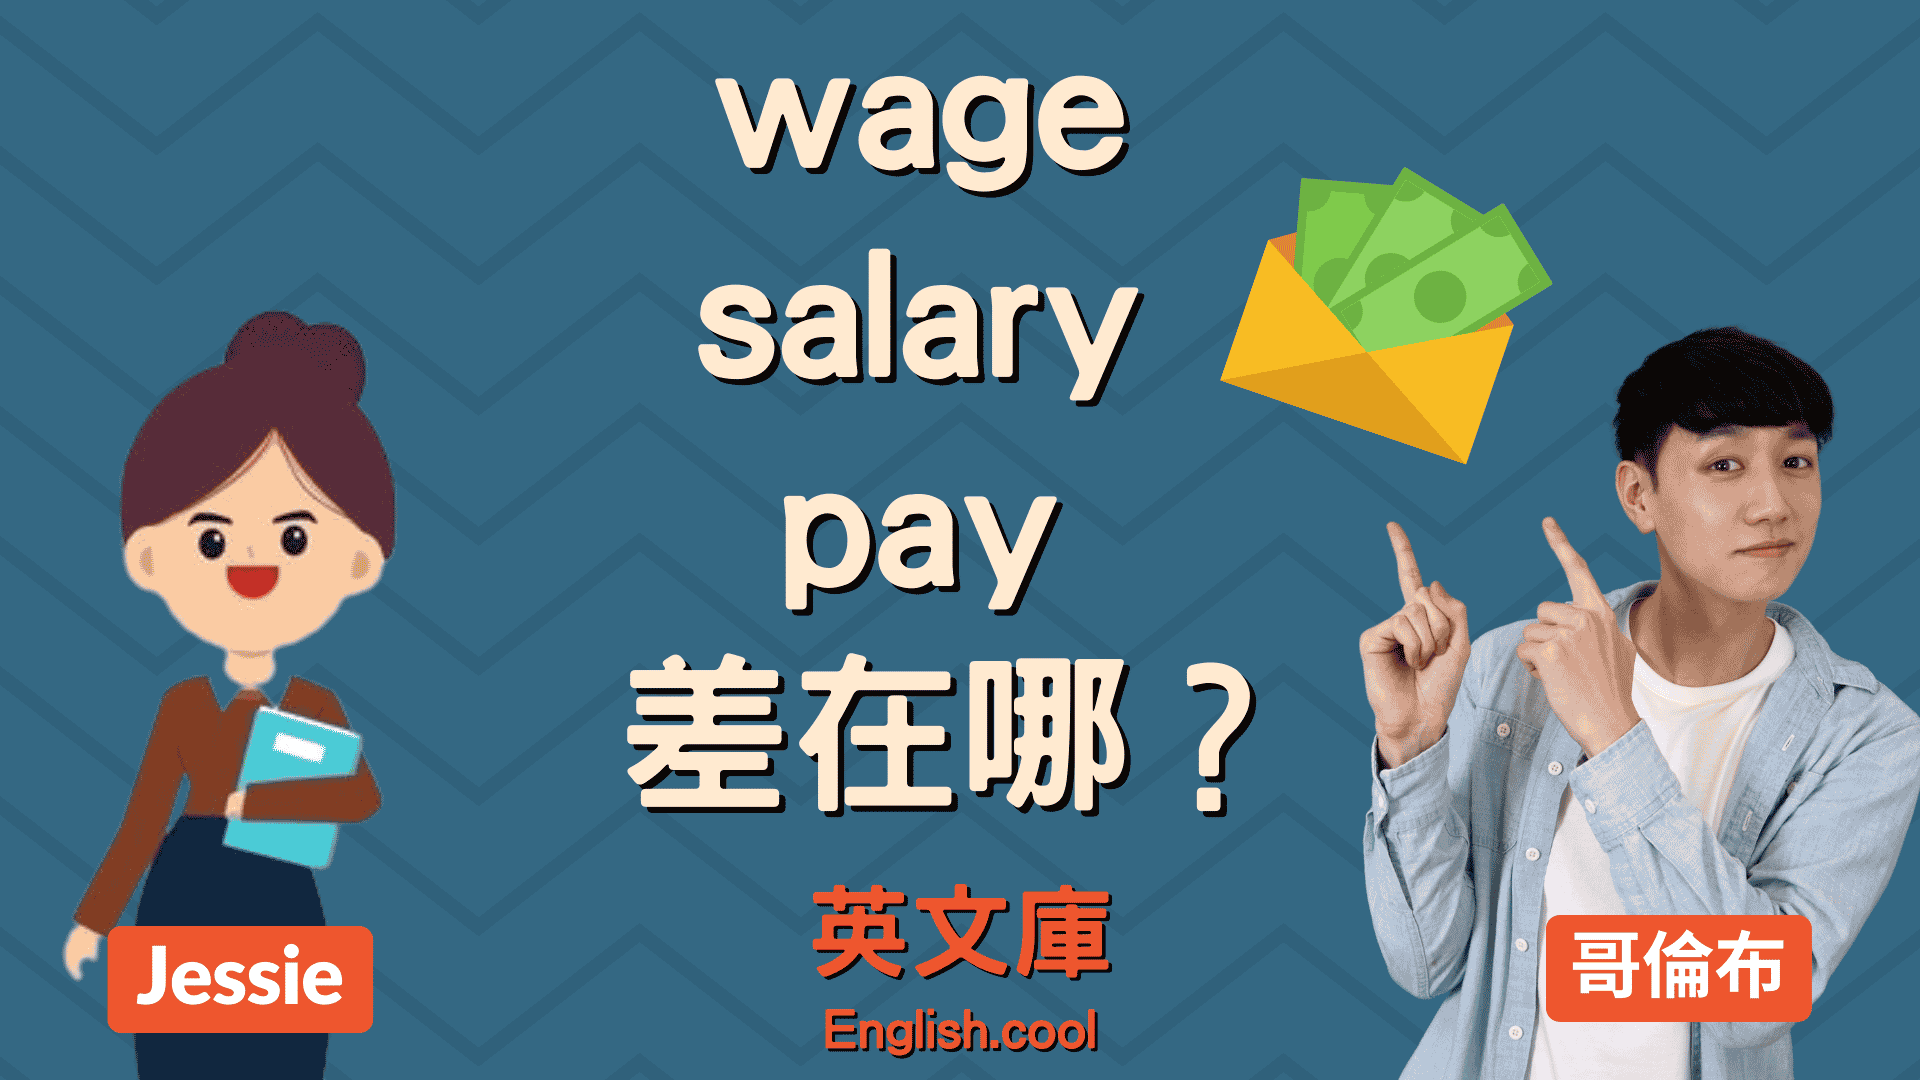 You are currently viewing 【薪水英文】wage / salary / pay 差在哪？